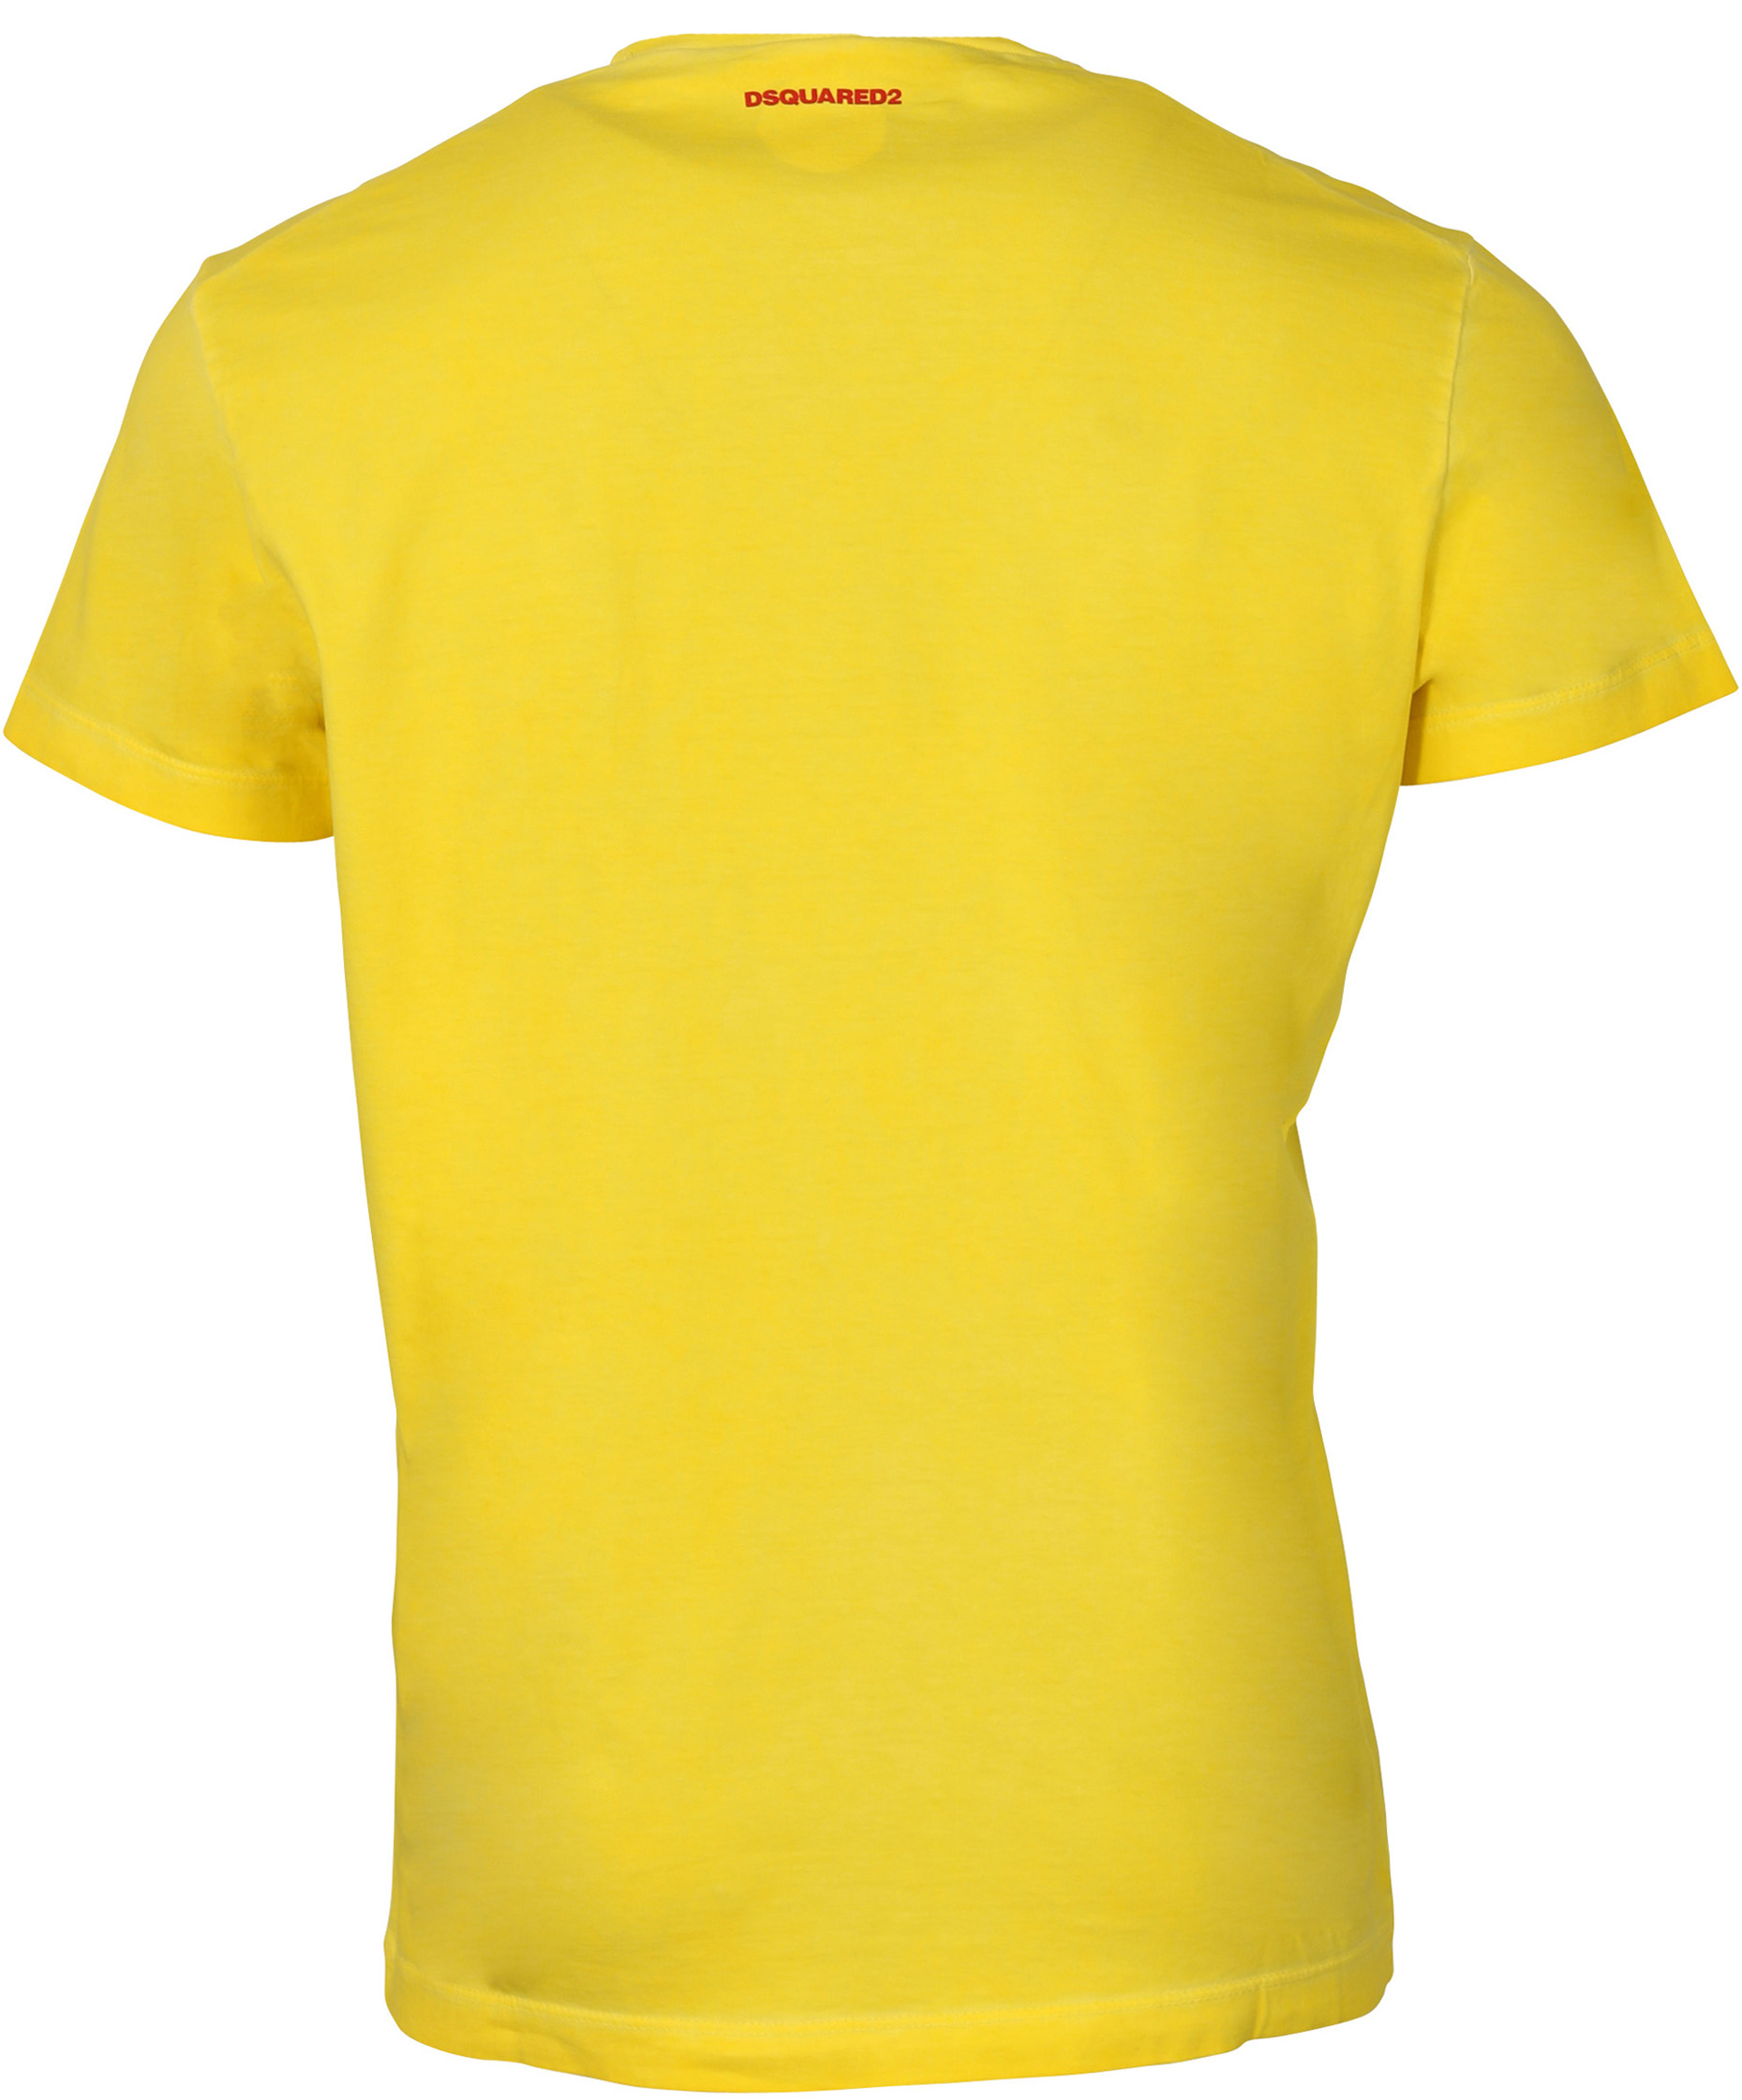 Dsquared T-Shirt Yellow Printed